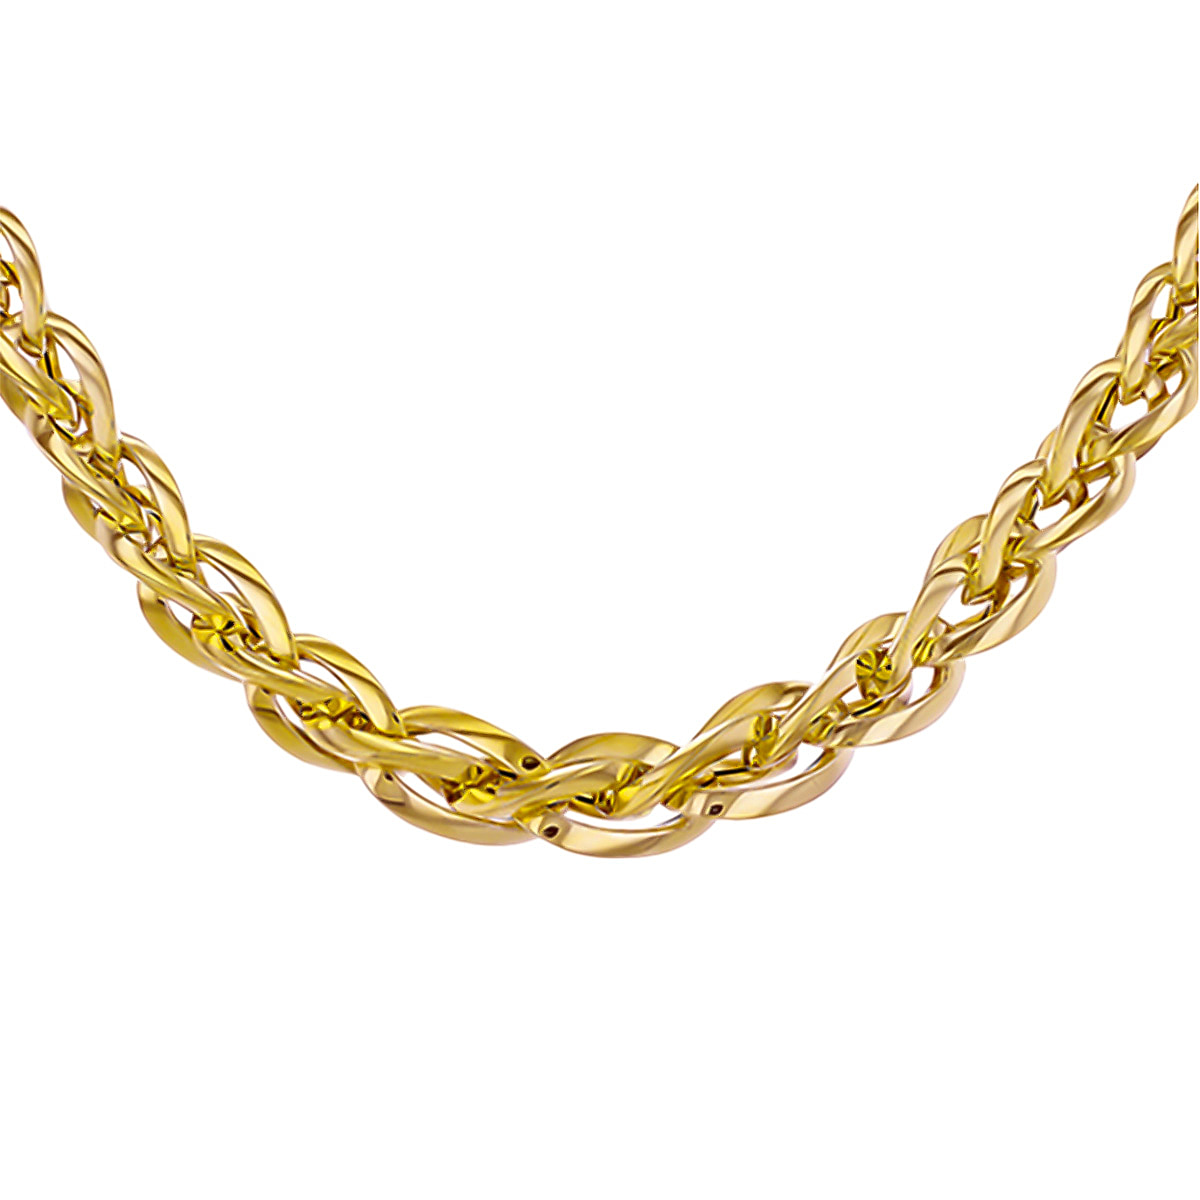 Designer Inspired Closeout - 9K Yellow Gold Woven Link Necklace (Size - 18), Gold Wt. 14.48 Gms